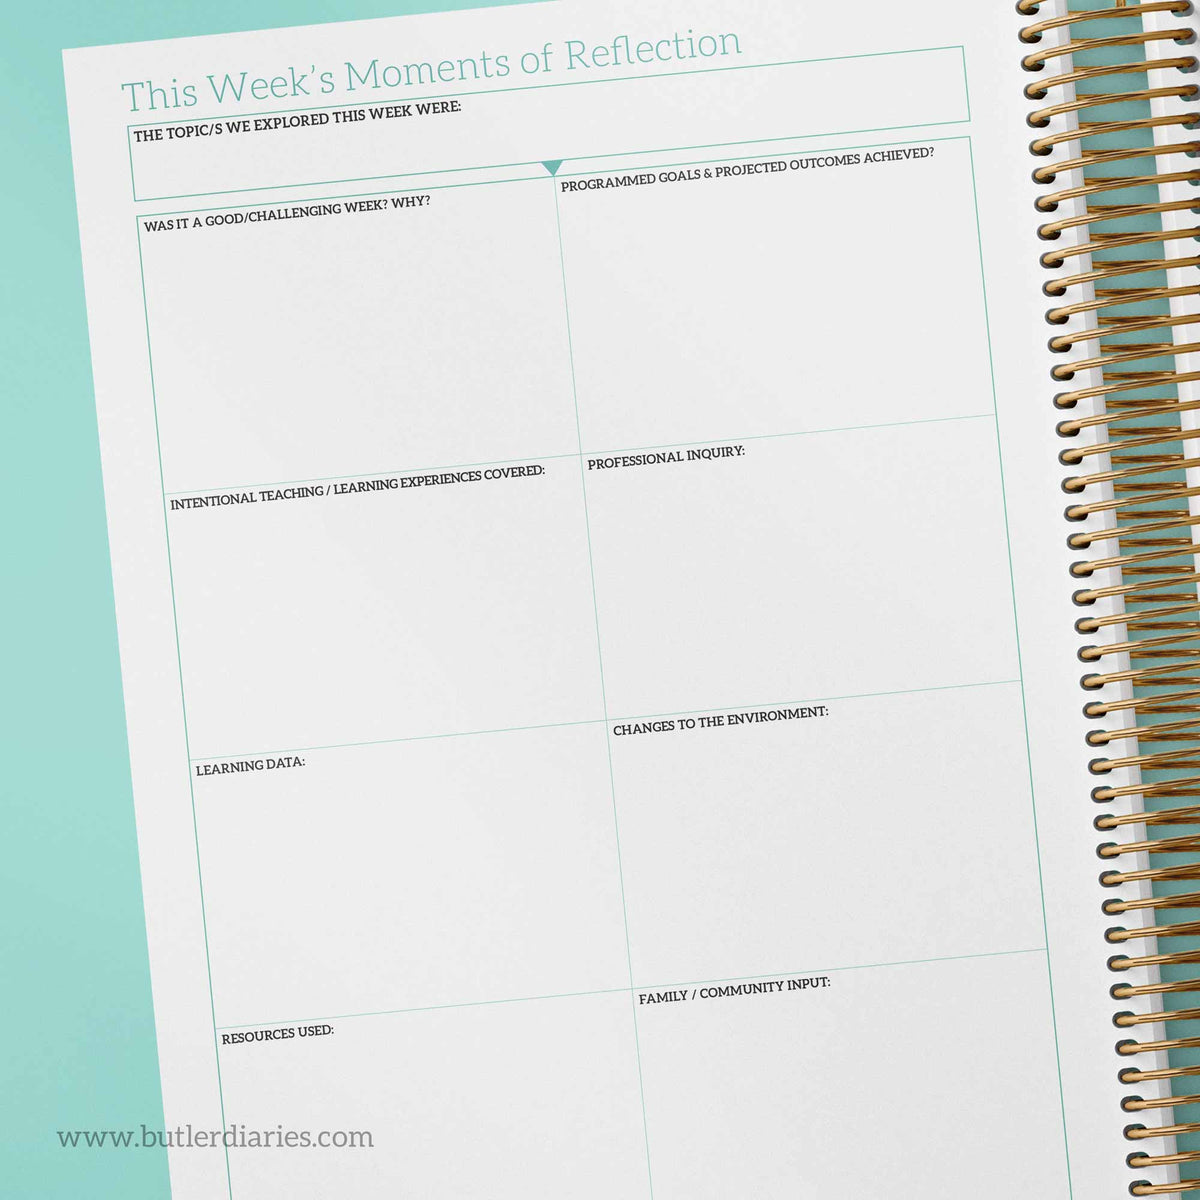 2024 Weekly Programming and Reflection Child Educator Diary